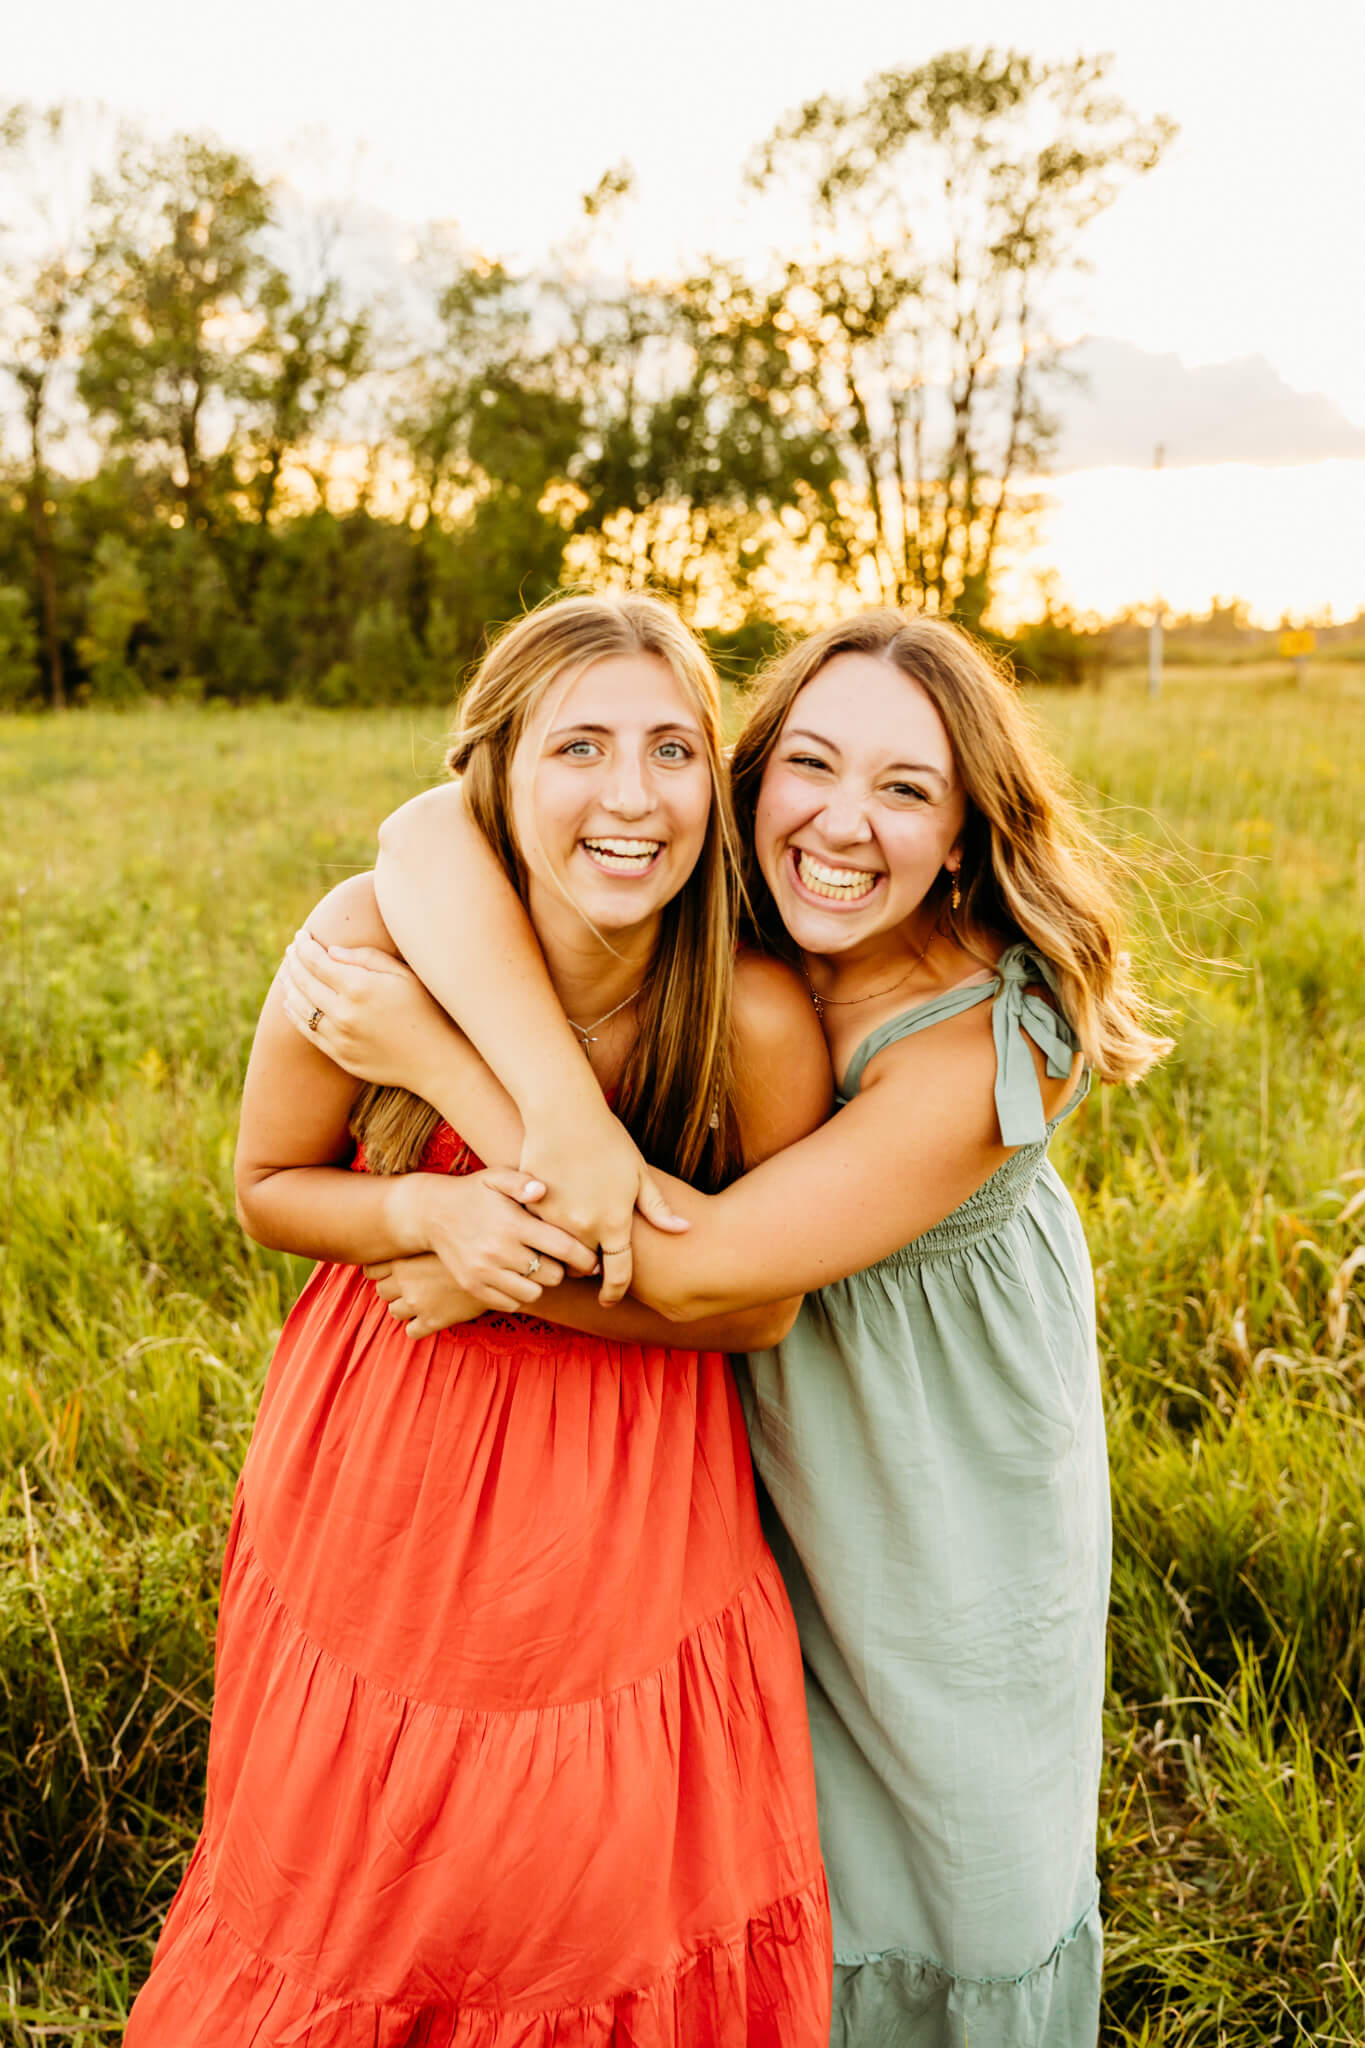 teen girl in a green dress hugging another teen girl in an orange dress in a field at sunset as they both laugh